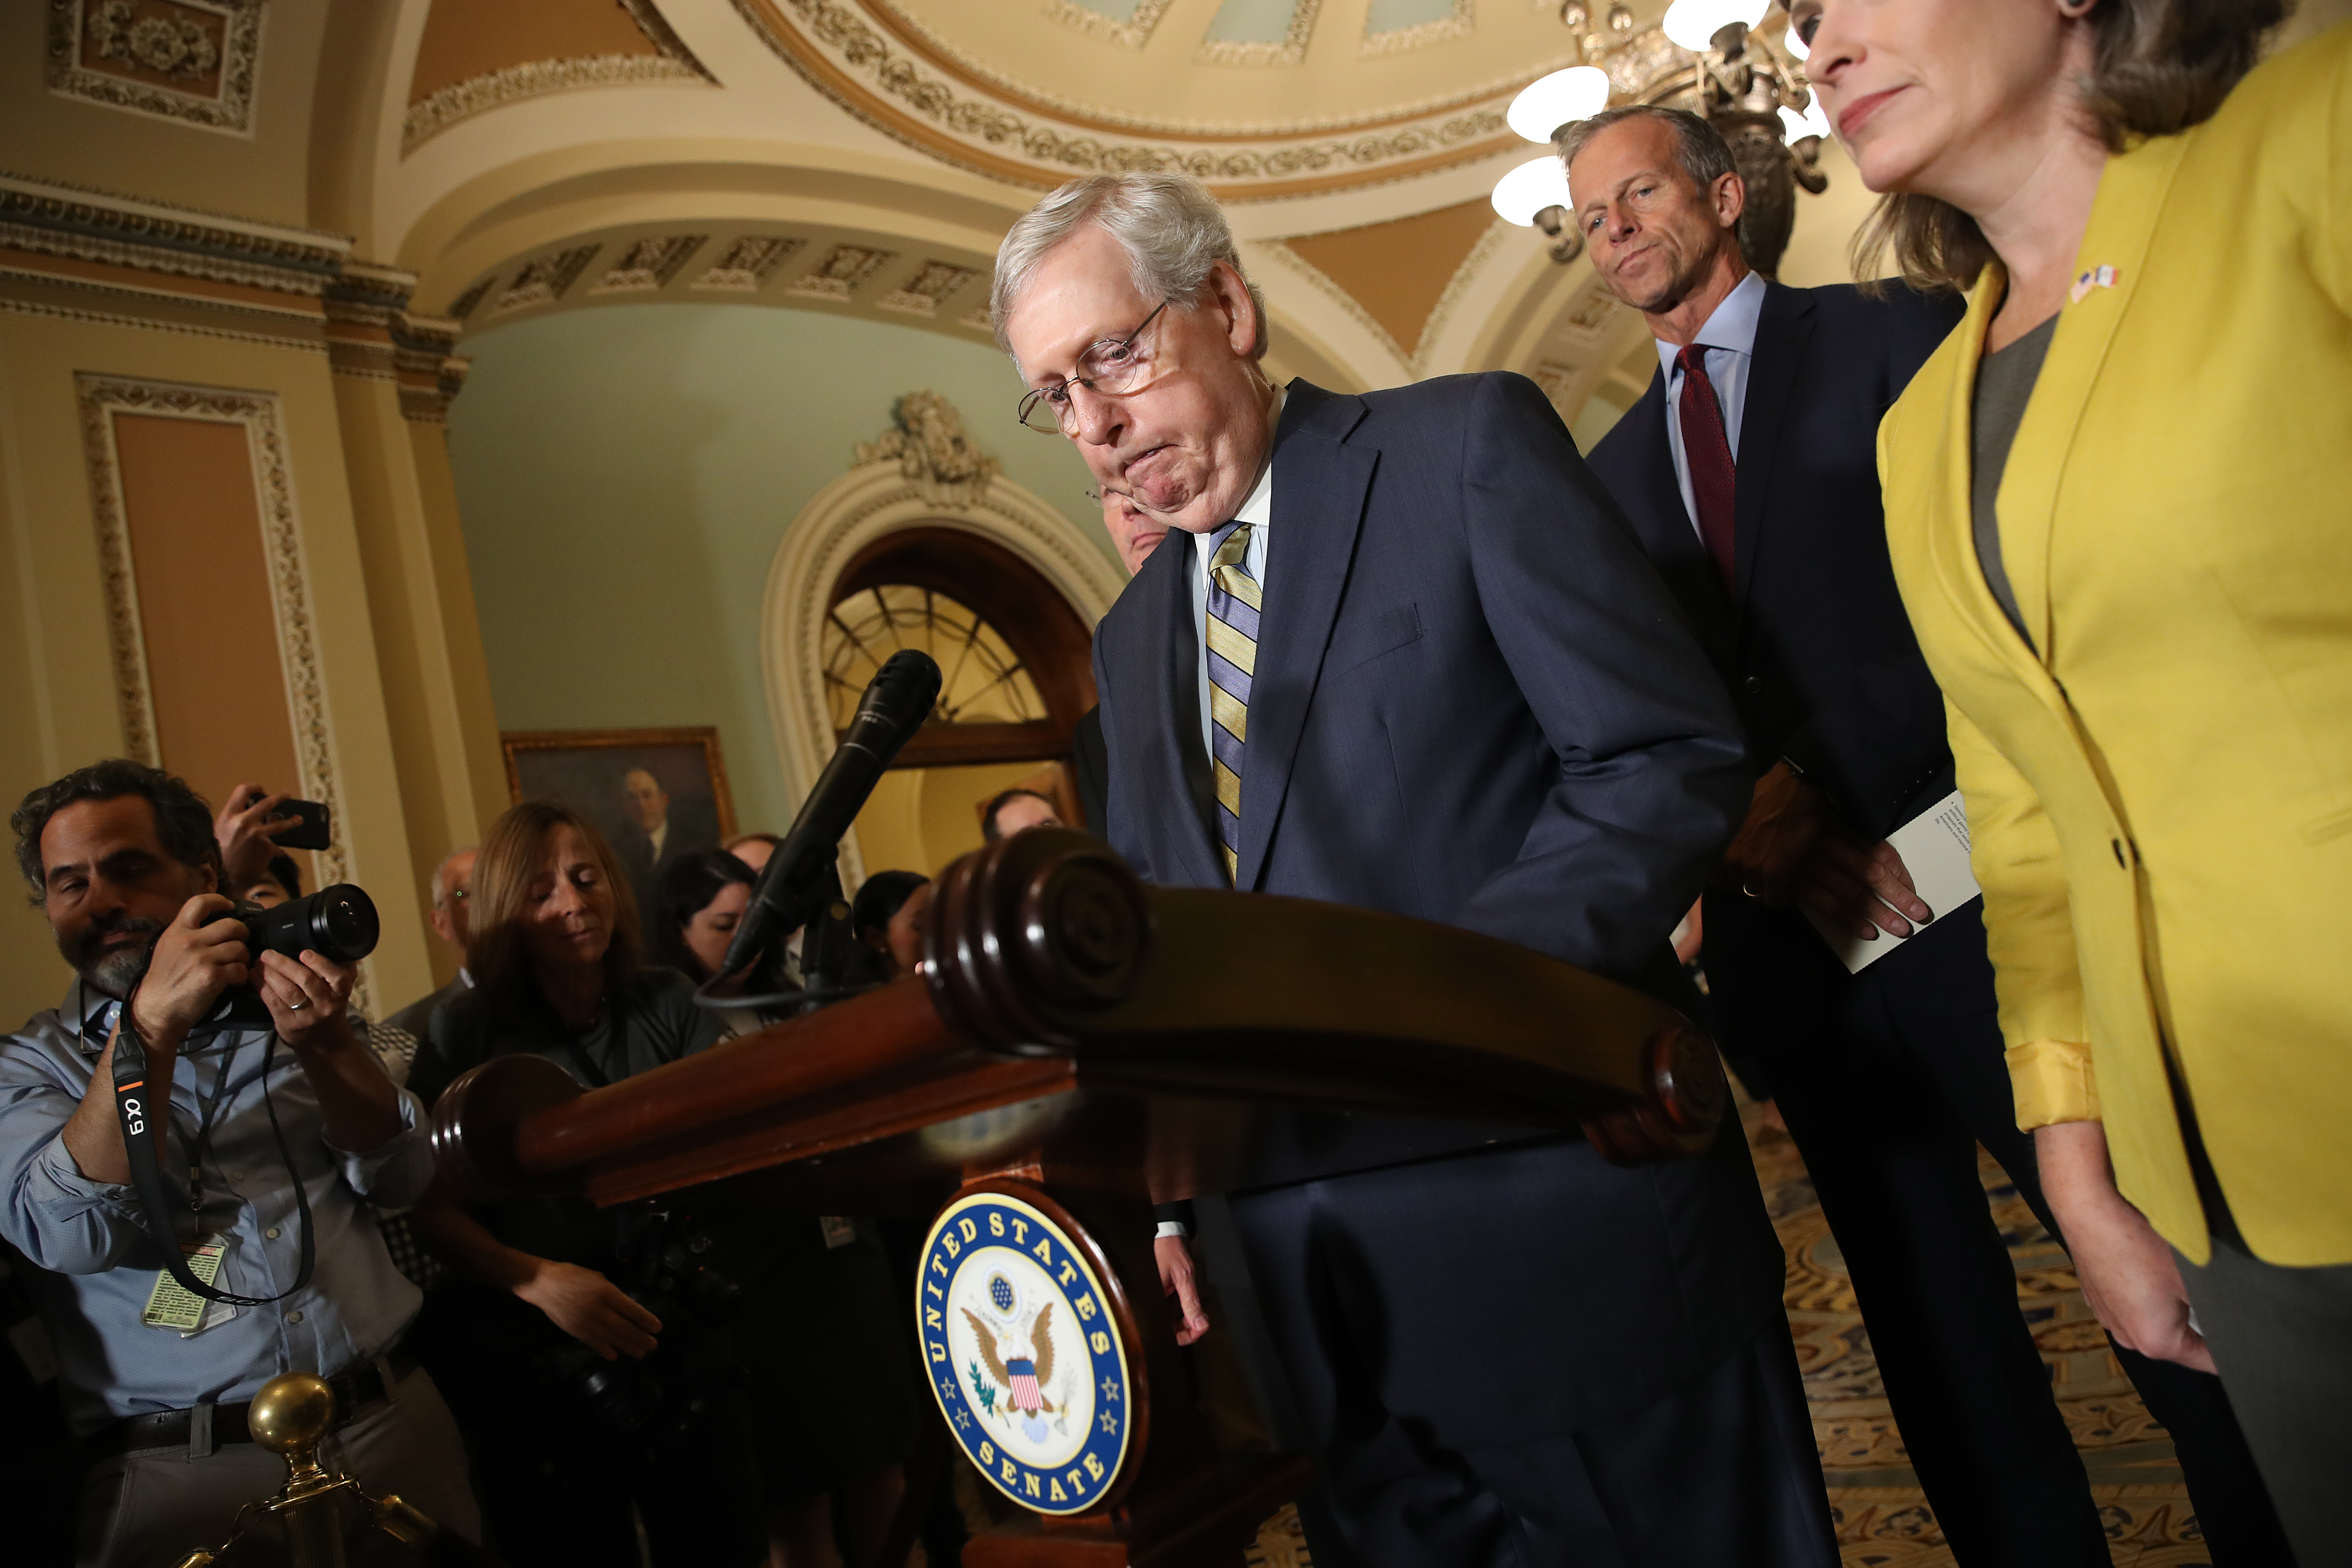 Senate Majority Leader Mitch McConnell (R-KY) answers questions on the potential of impeachment proceedings against U.S. President Donald Trump on September 24, 2019 in Washington, DC. (Win McNamee/Getty Images)